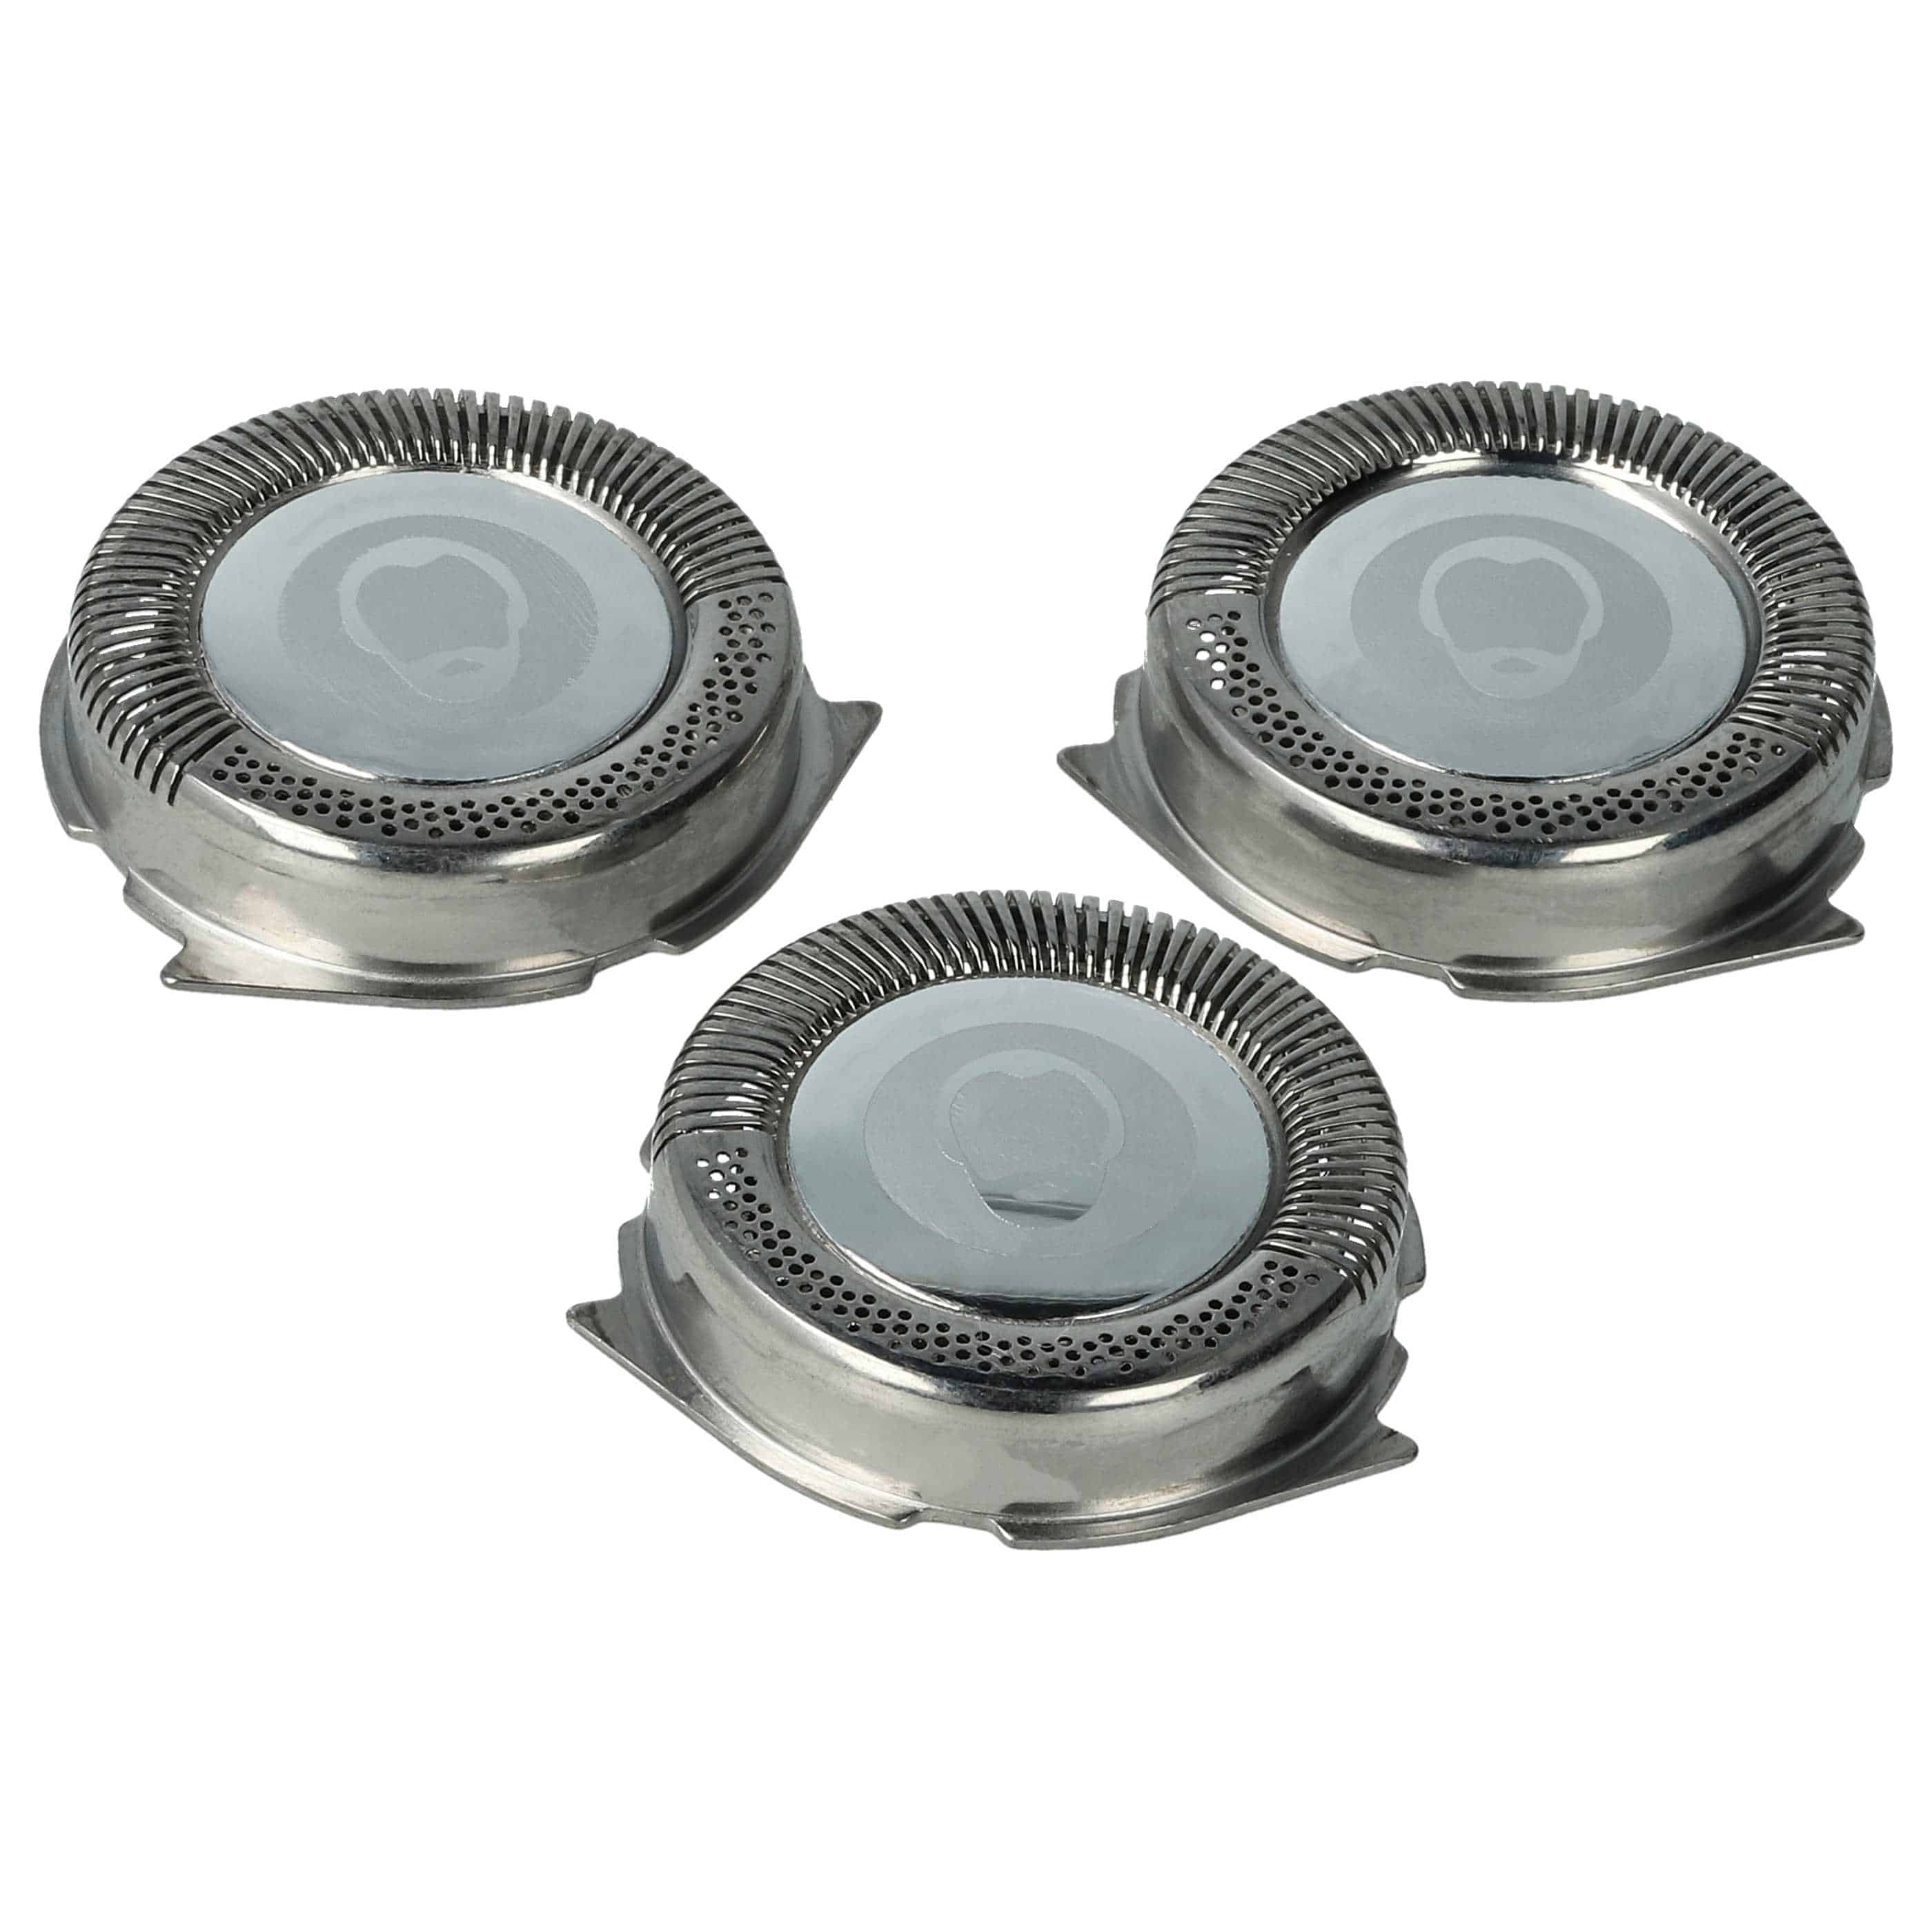 3x shaving head as Replacement for Philips HQ6 for Philips Shaver - Stainless Steel